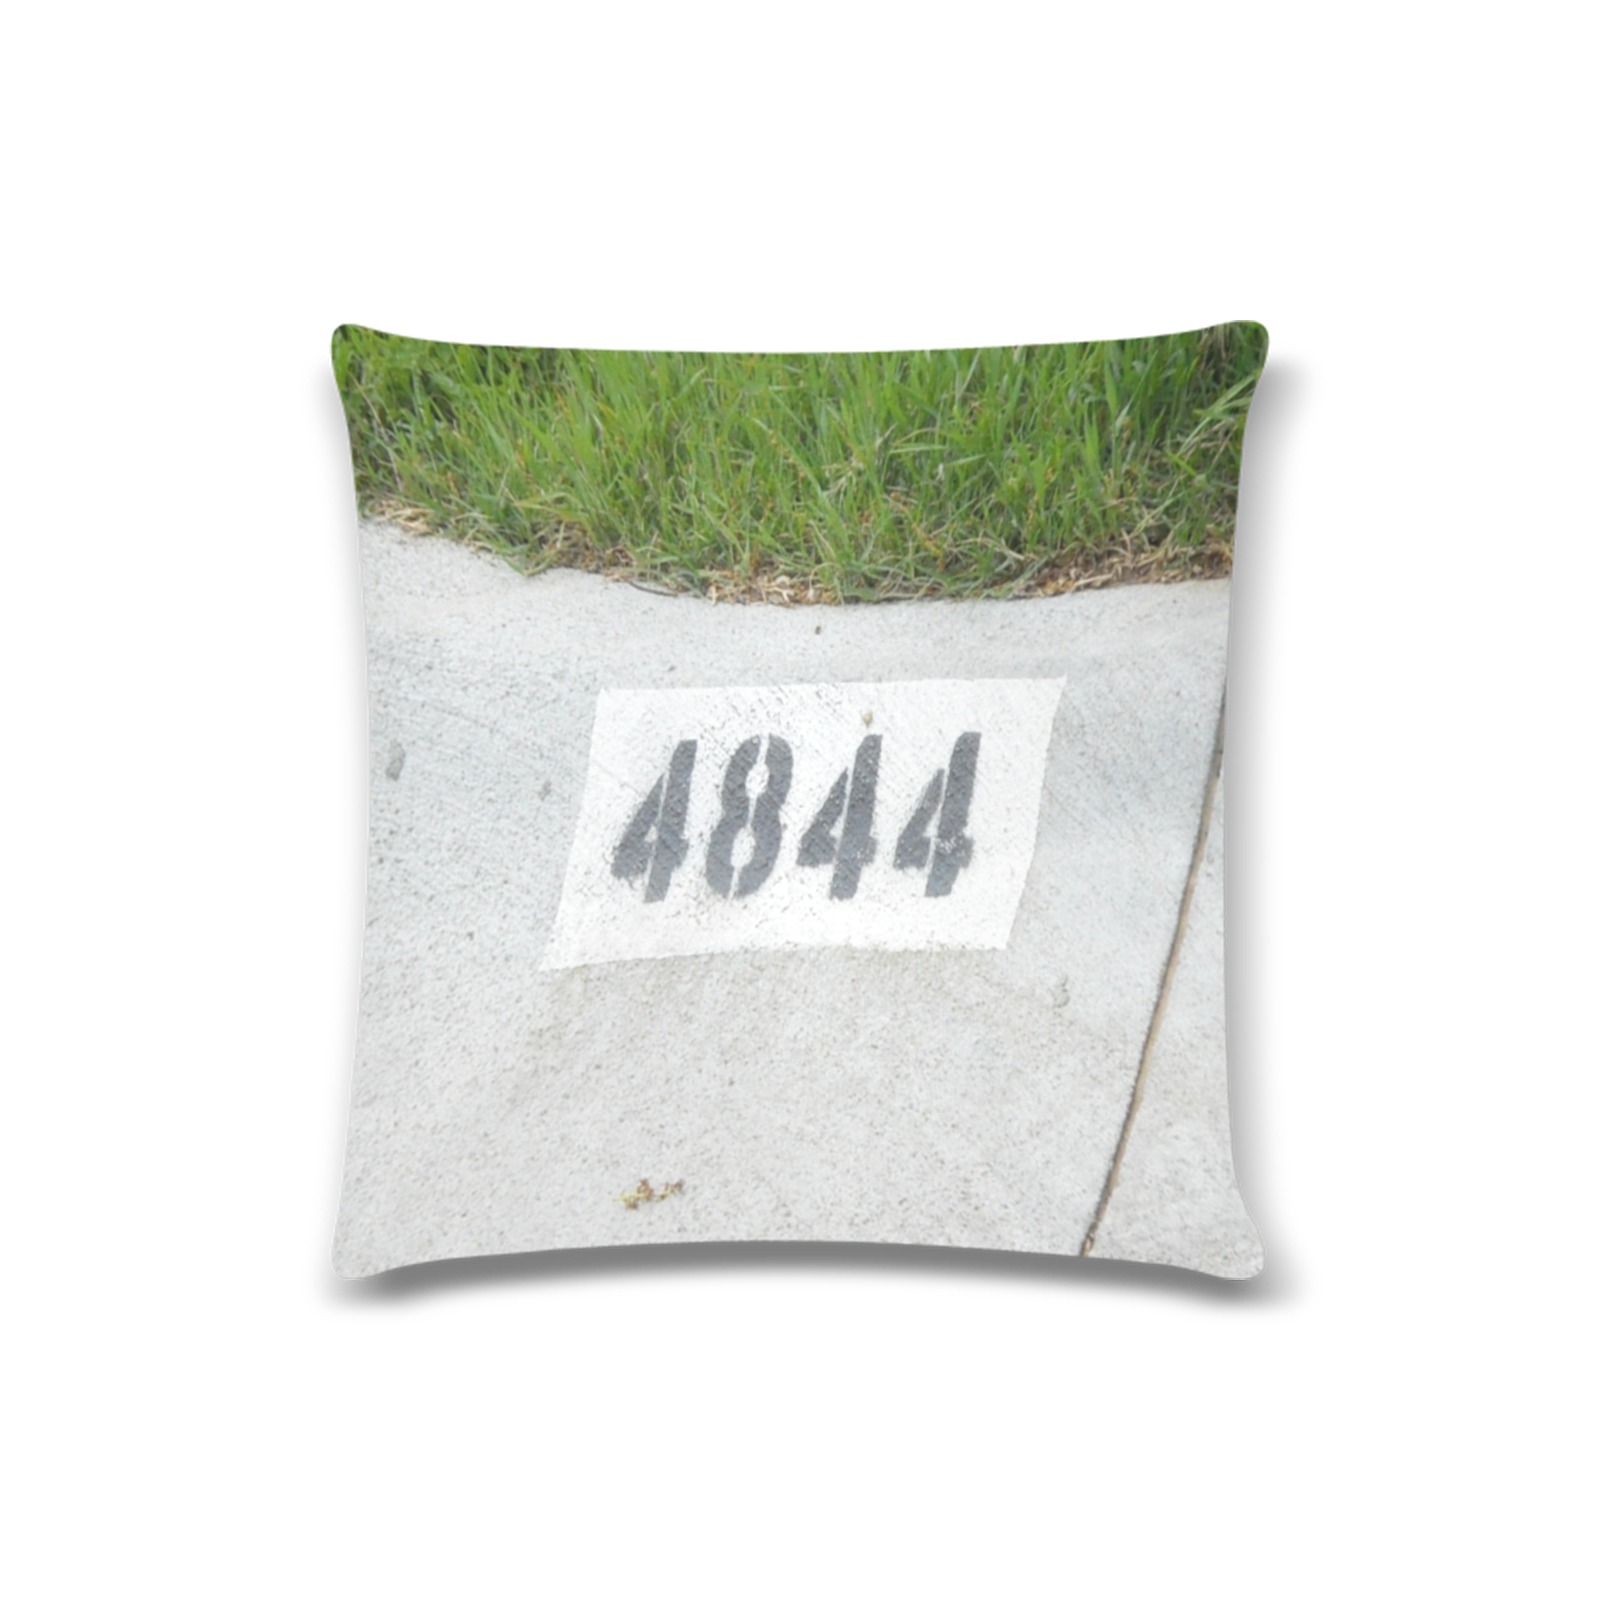 Street Number 4844 Custom Zippered Pillow Case 16"x16"(Twin Sides)